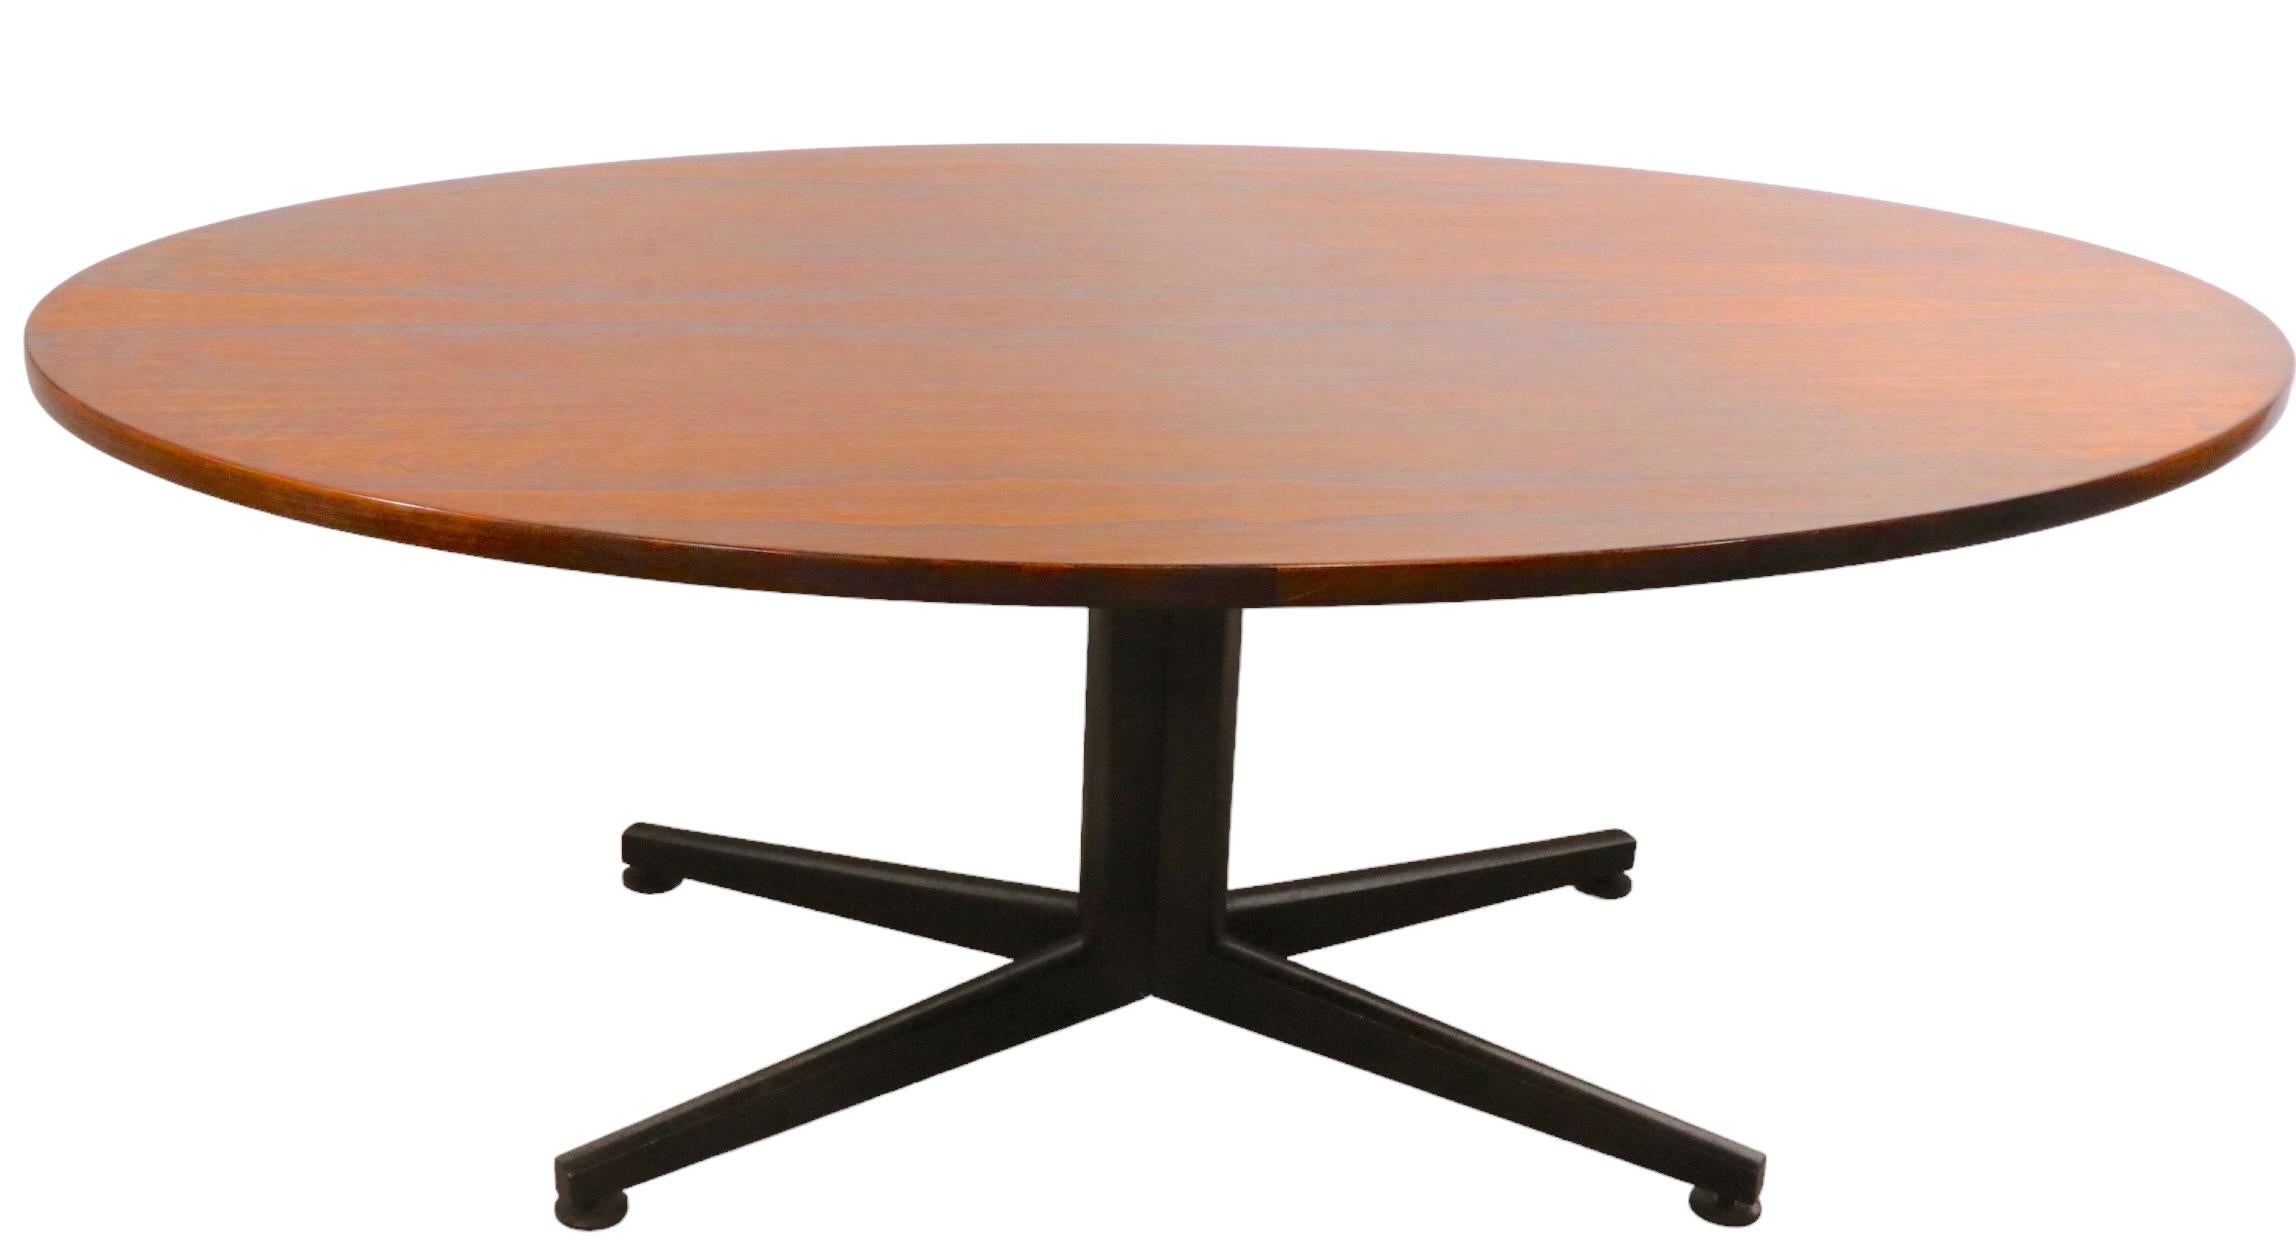 Dunbar Wormley Dining Table in Rosewood Model 936 C 1950/1960's For Sale 1